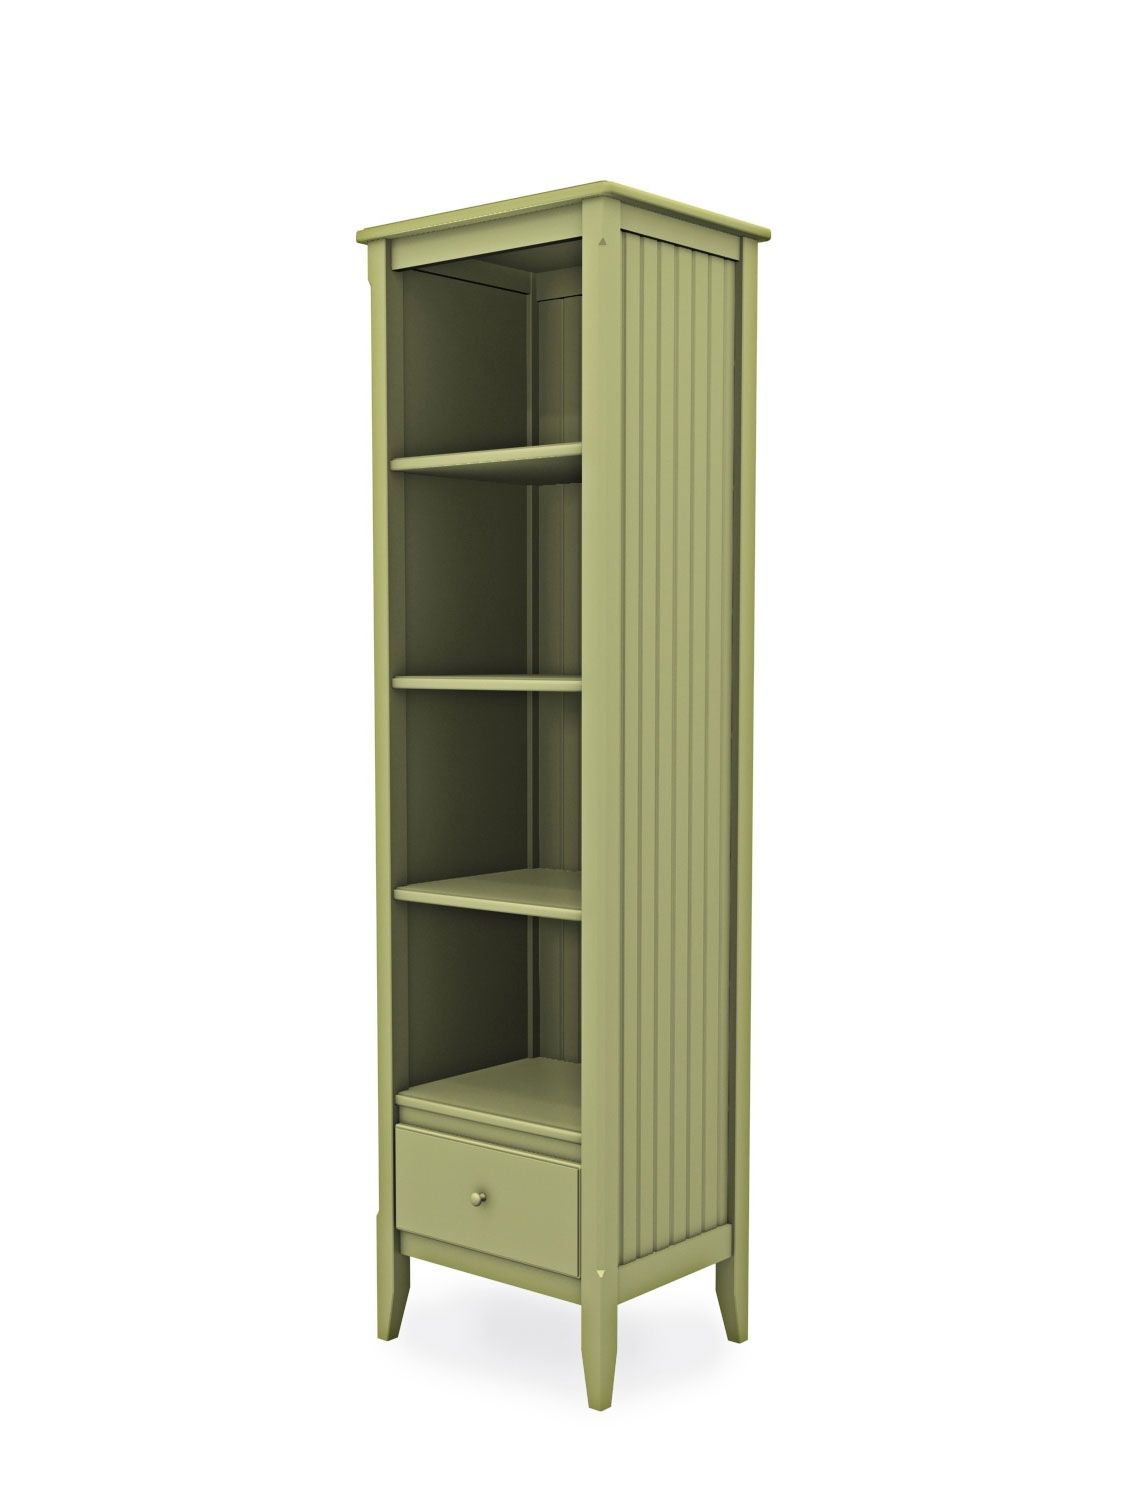 Narrow Tall Bookcases Inside Fashionable Bookcases Ideas: Element Tall Narrow Five Shelf Bookcase Deals (View 8 of 15)